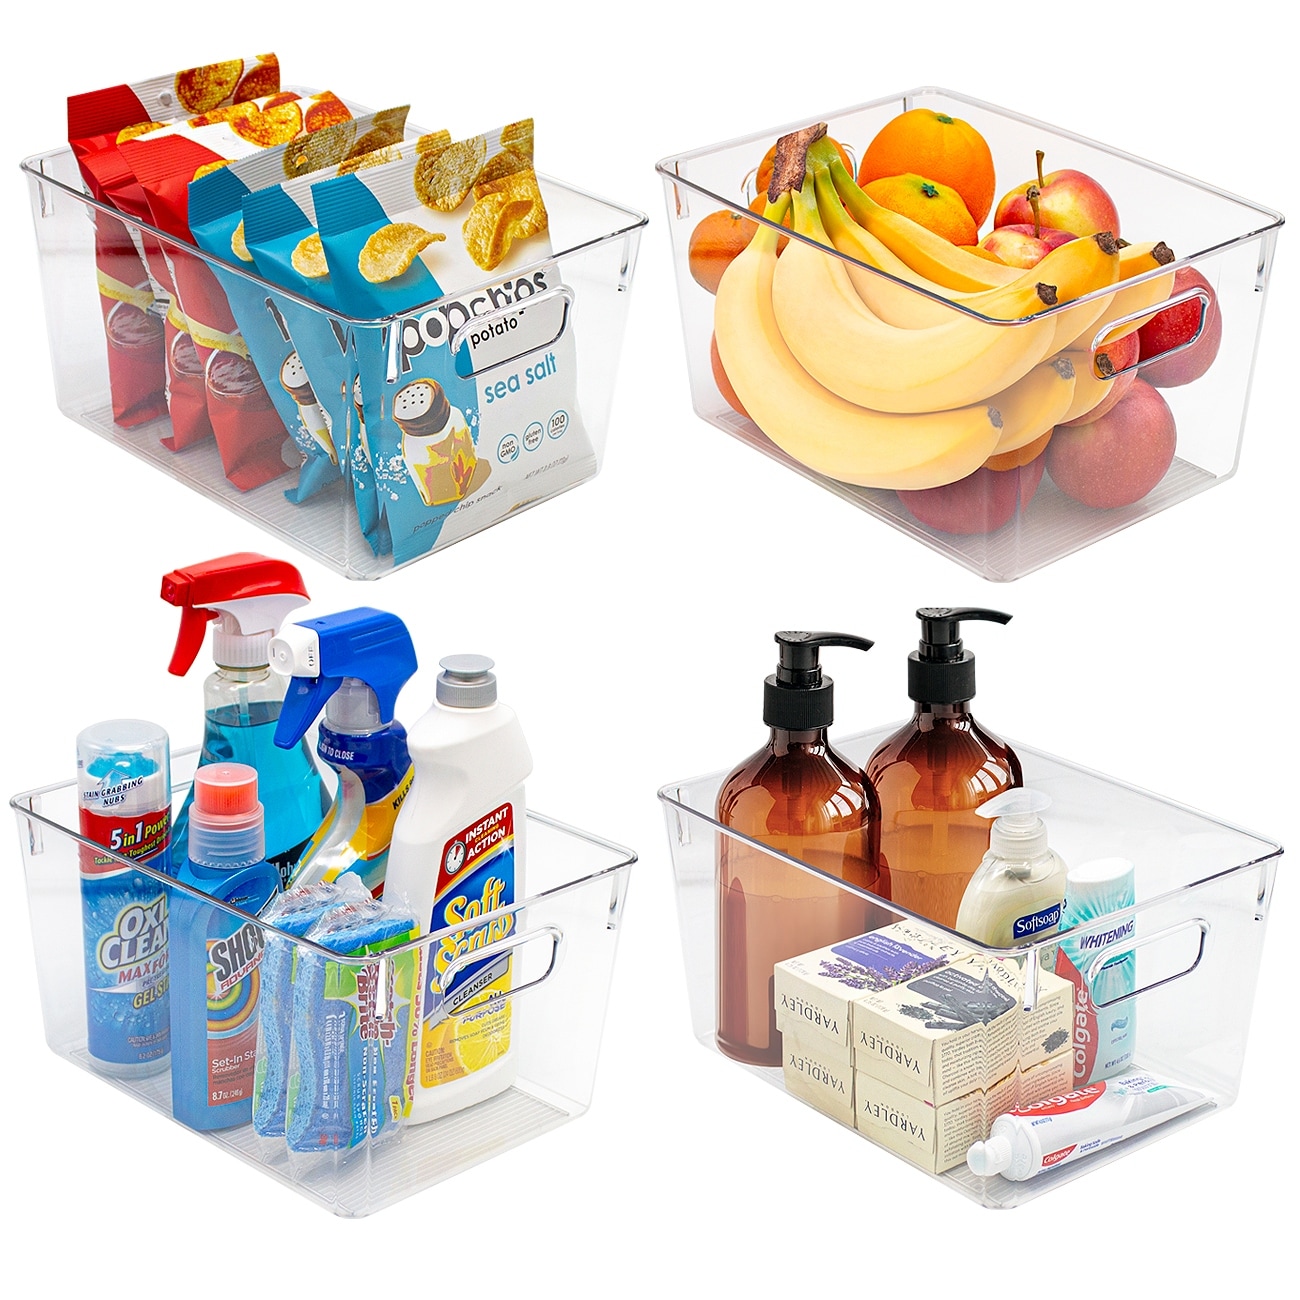 Sorbus 2 Roll Out Bottle Organization Bins - Pantry Under Sink Organizer with Wheels & Handles - Clear Plastic Organizing Containers for Bottles, & C